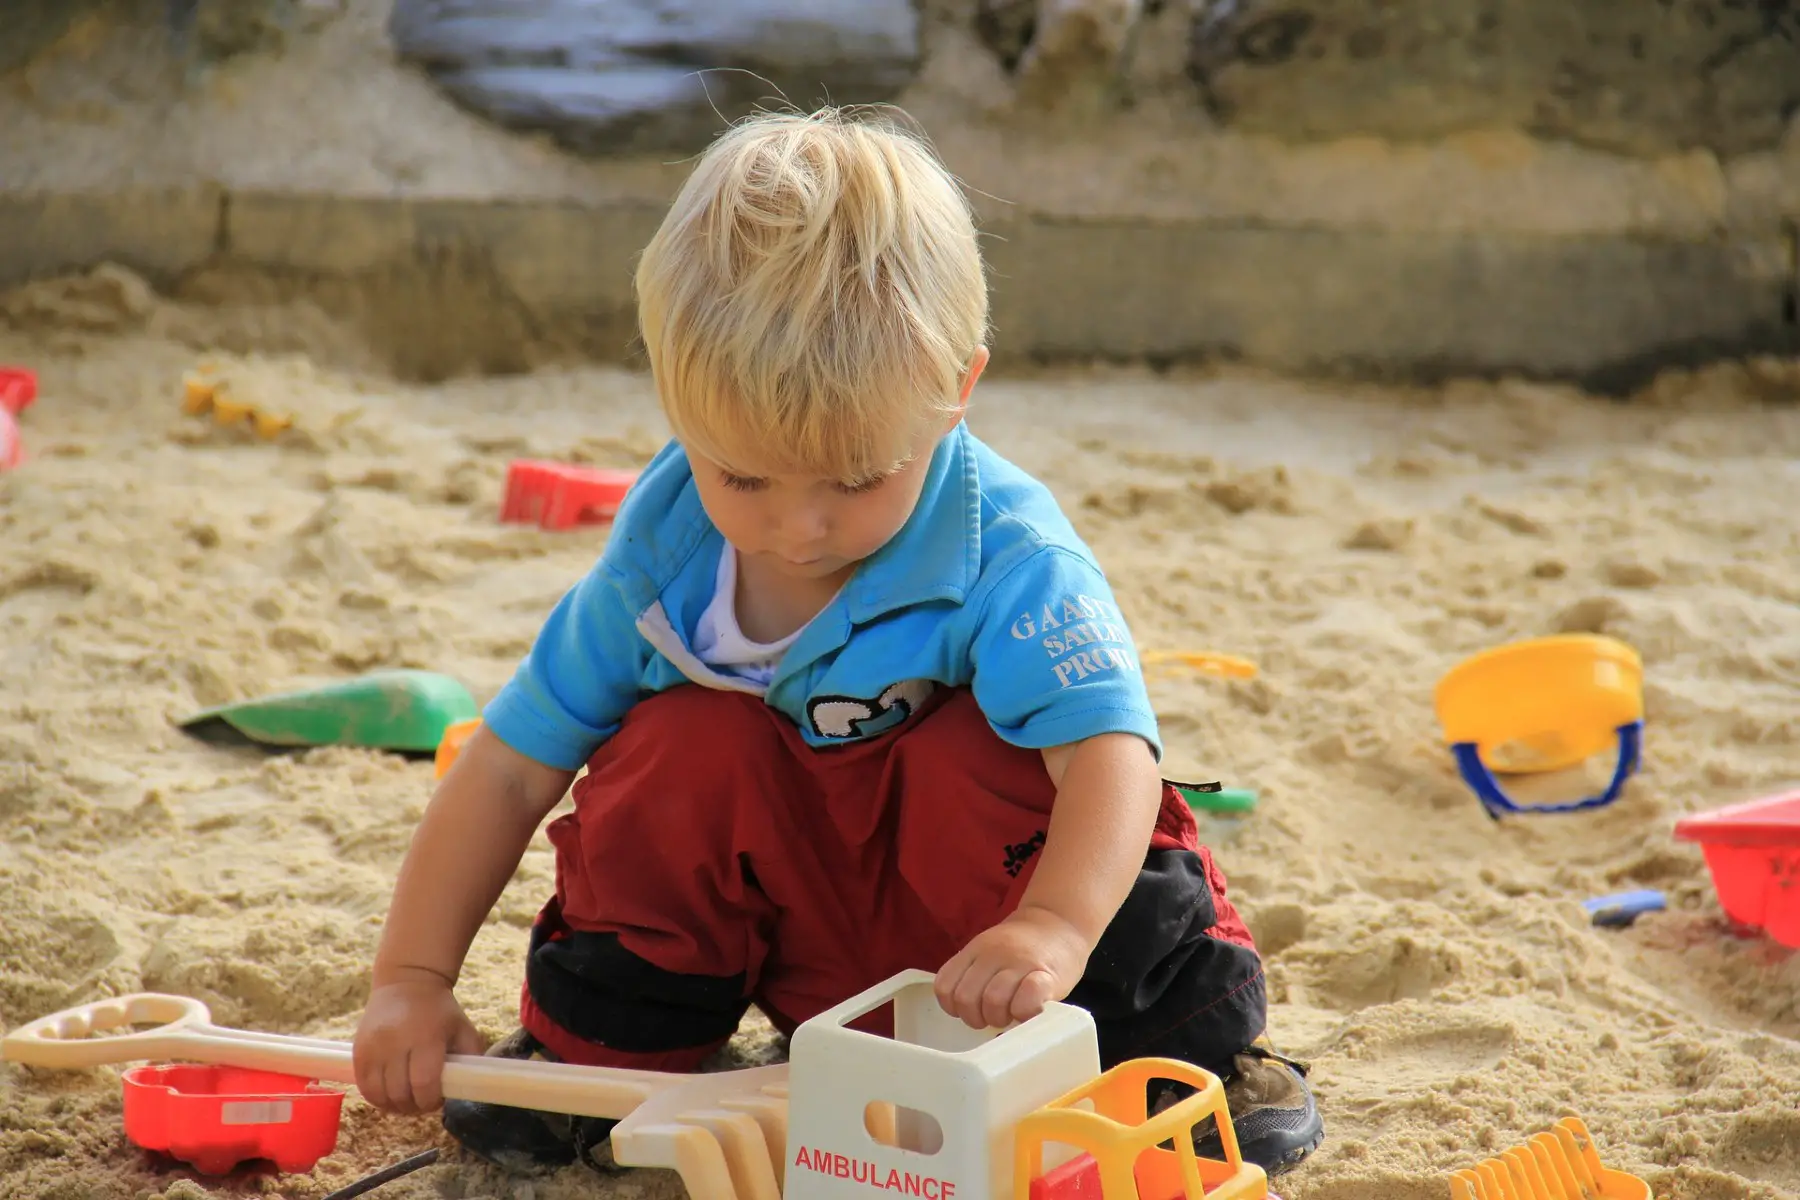 Little boy playing in the sandbox with a toy ambulance